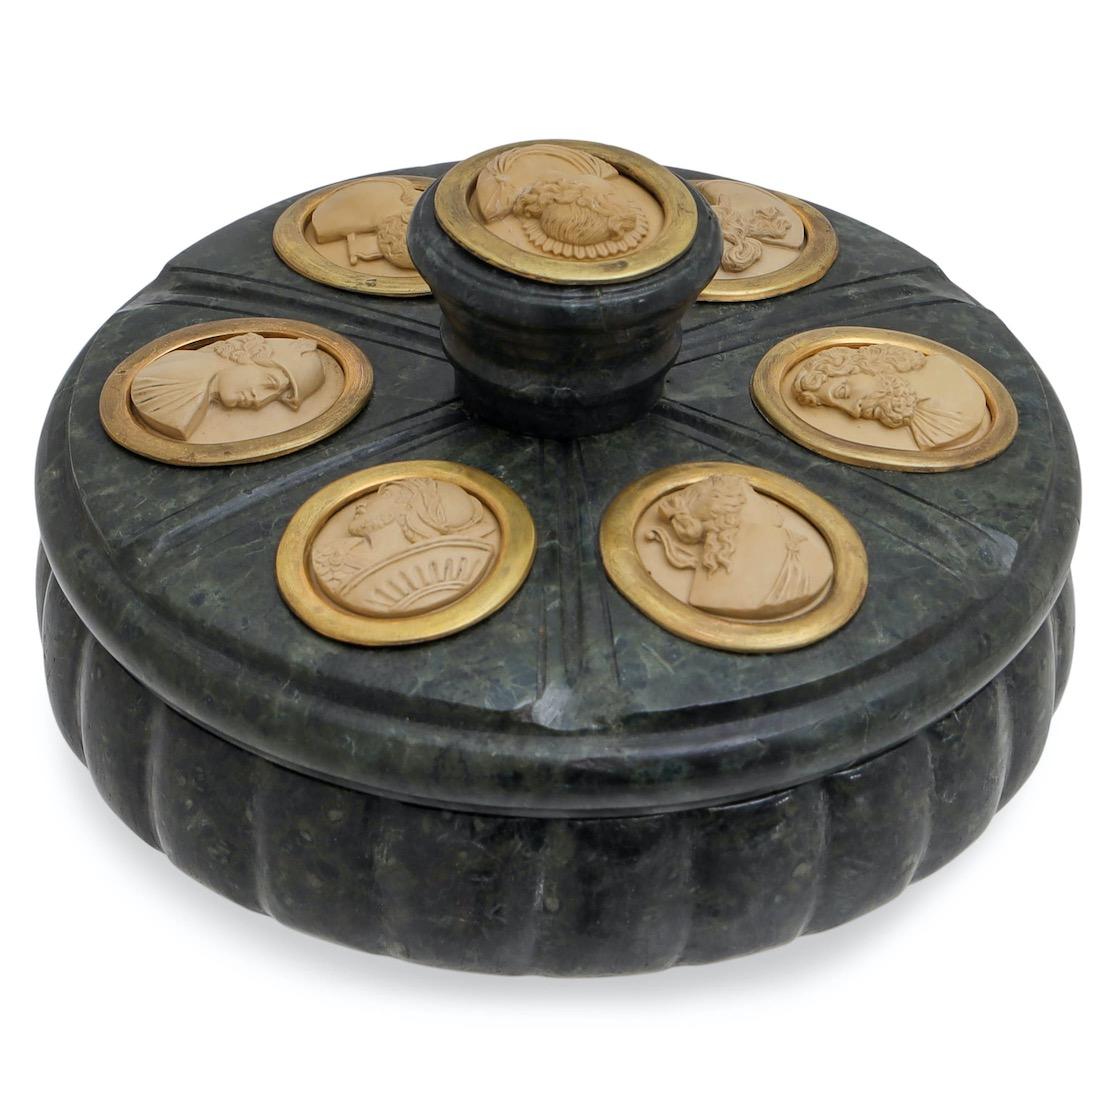 Round lidded vessel made of green marble with embedded inkwell, sprinkling barrel and brass holders. Lid with gouache painting of Naples. The lid with a round knob is divided into segments and decorated with cameos, which represent different gods in